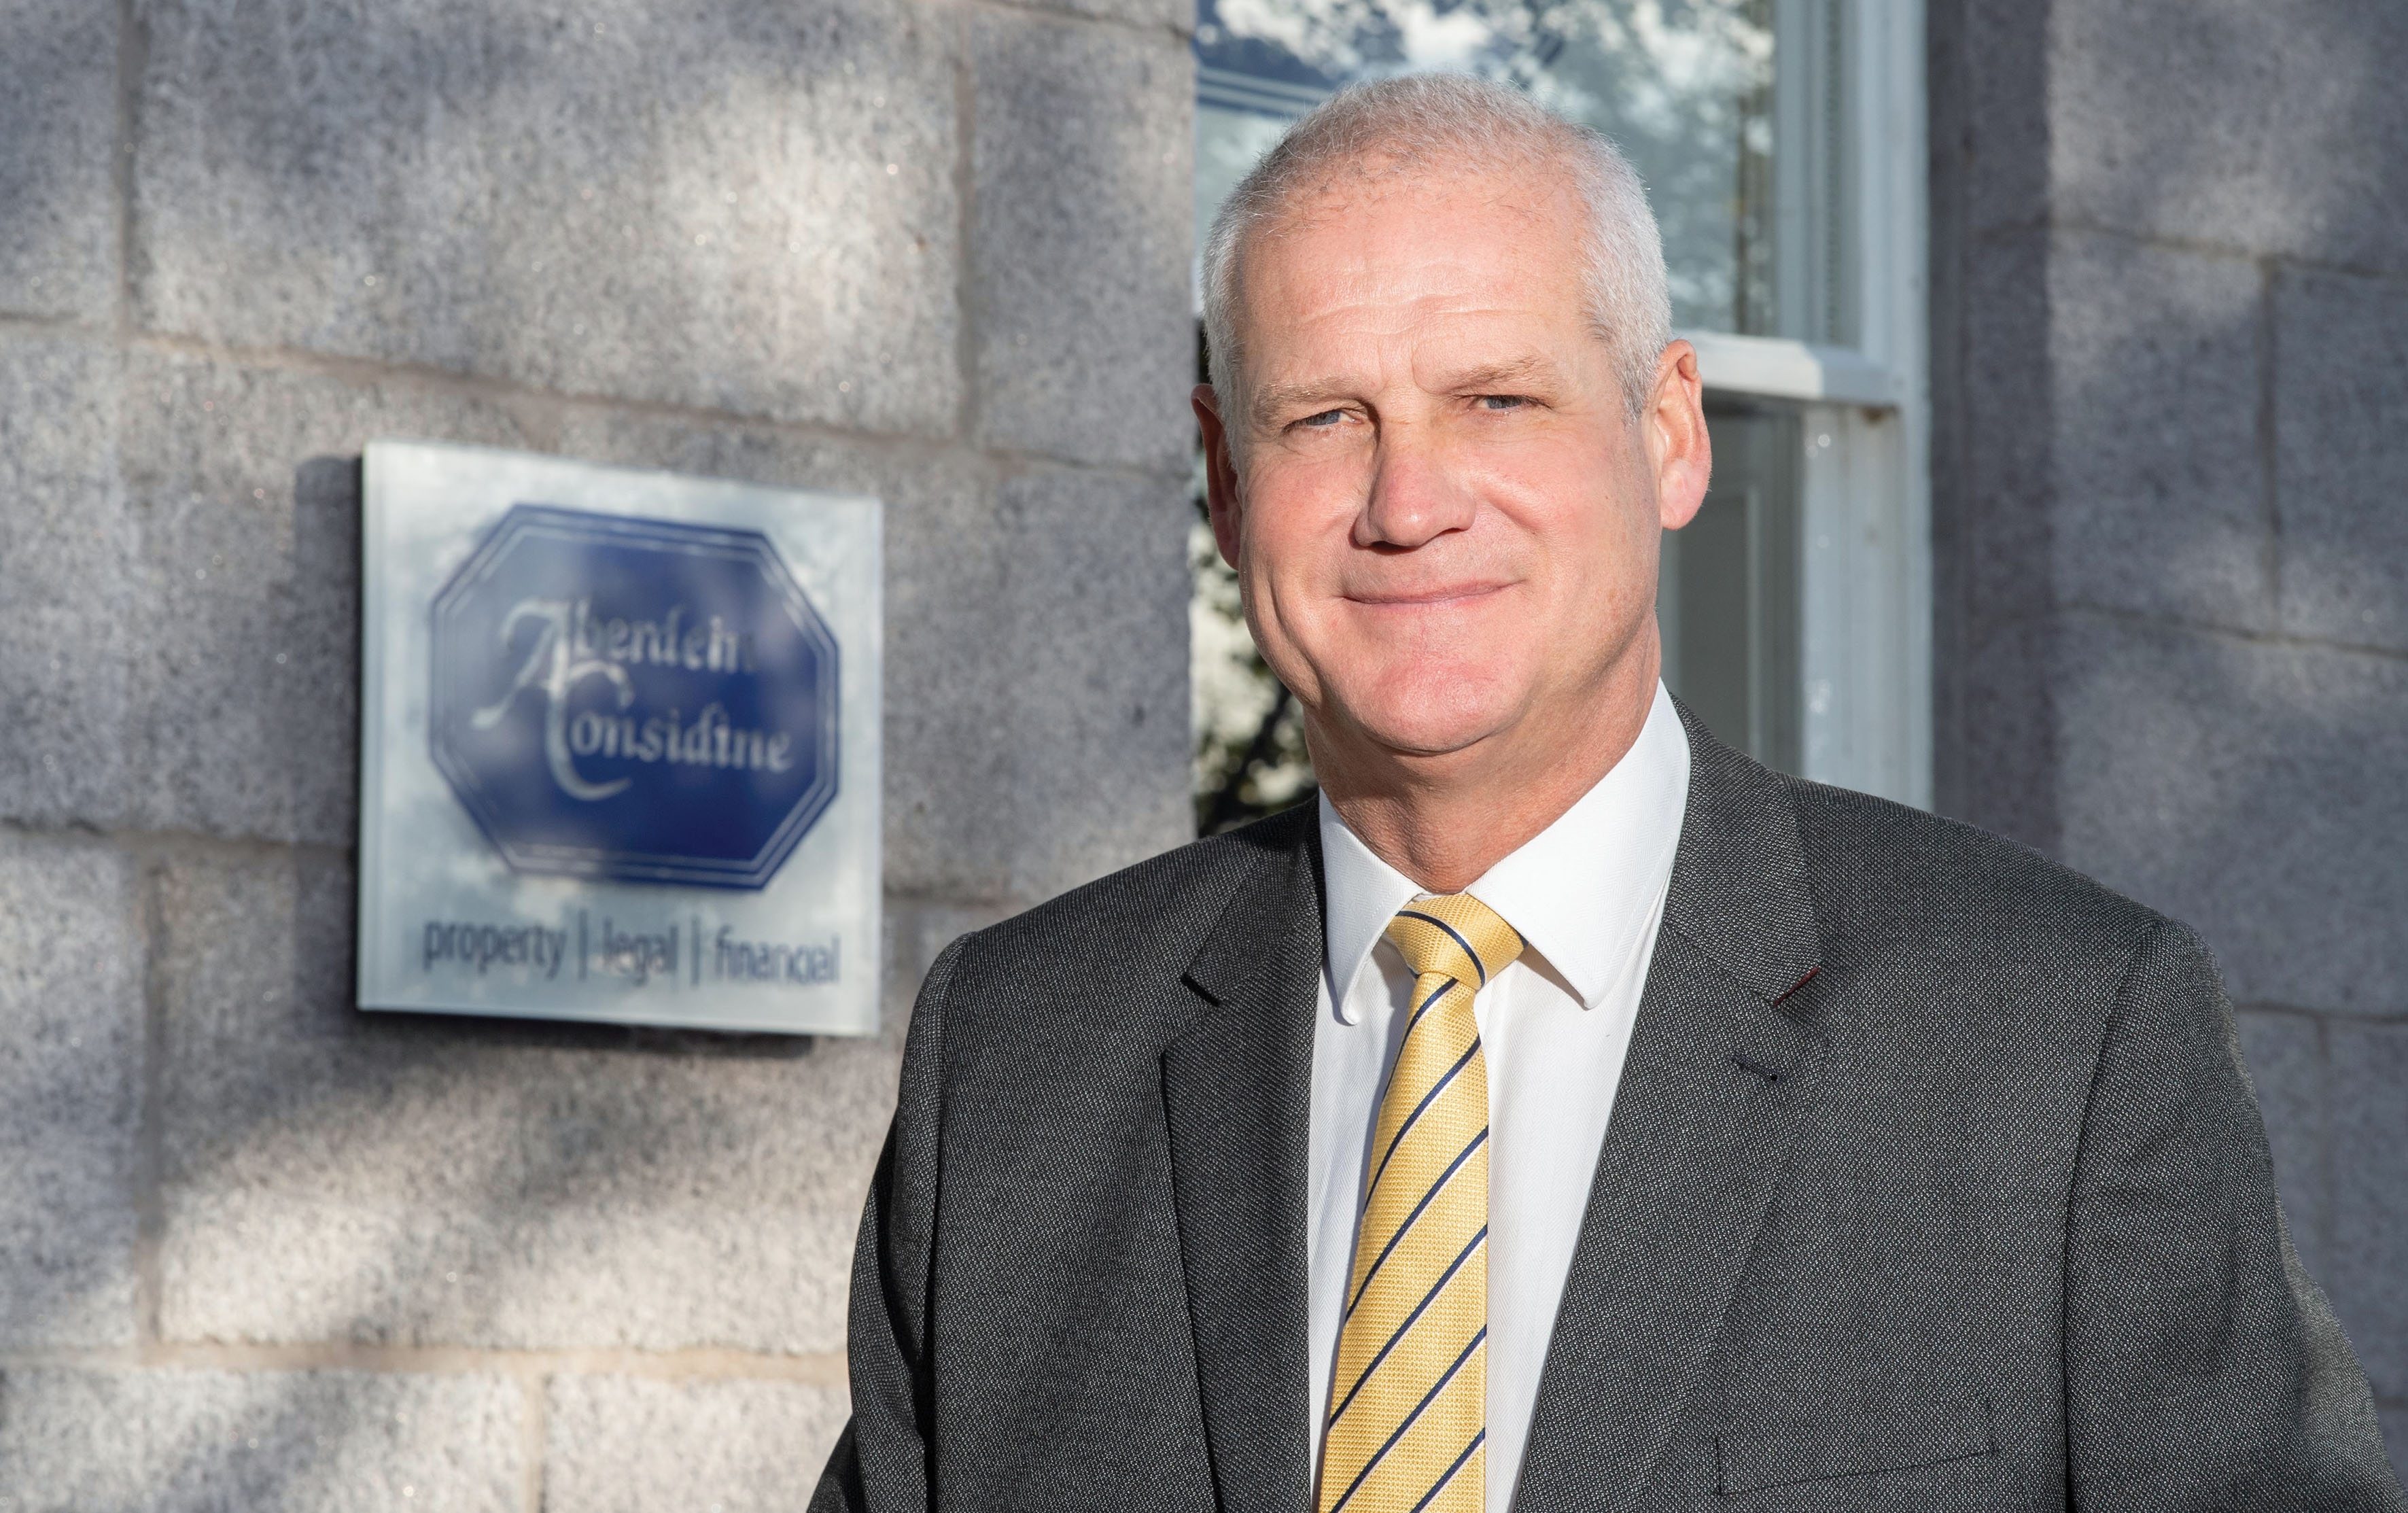 Aberdein Considine appoints UK banking veteran Colin Soulsby to its lender services group